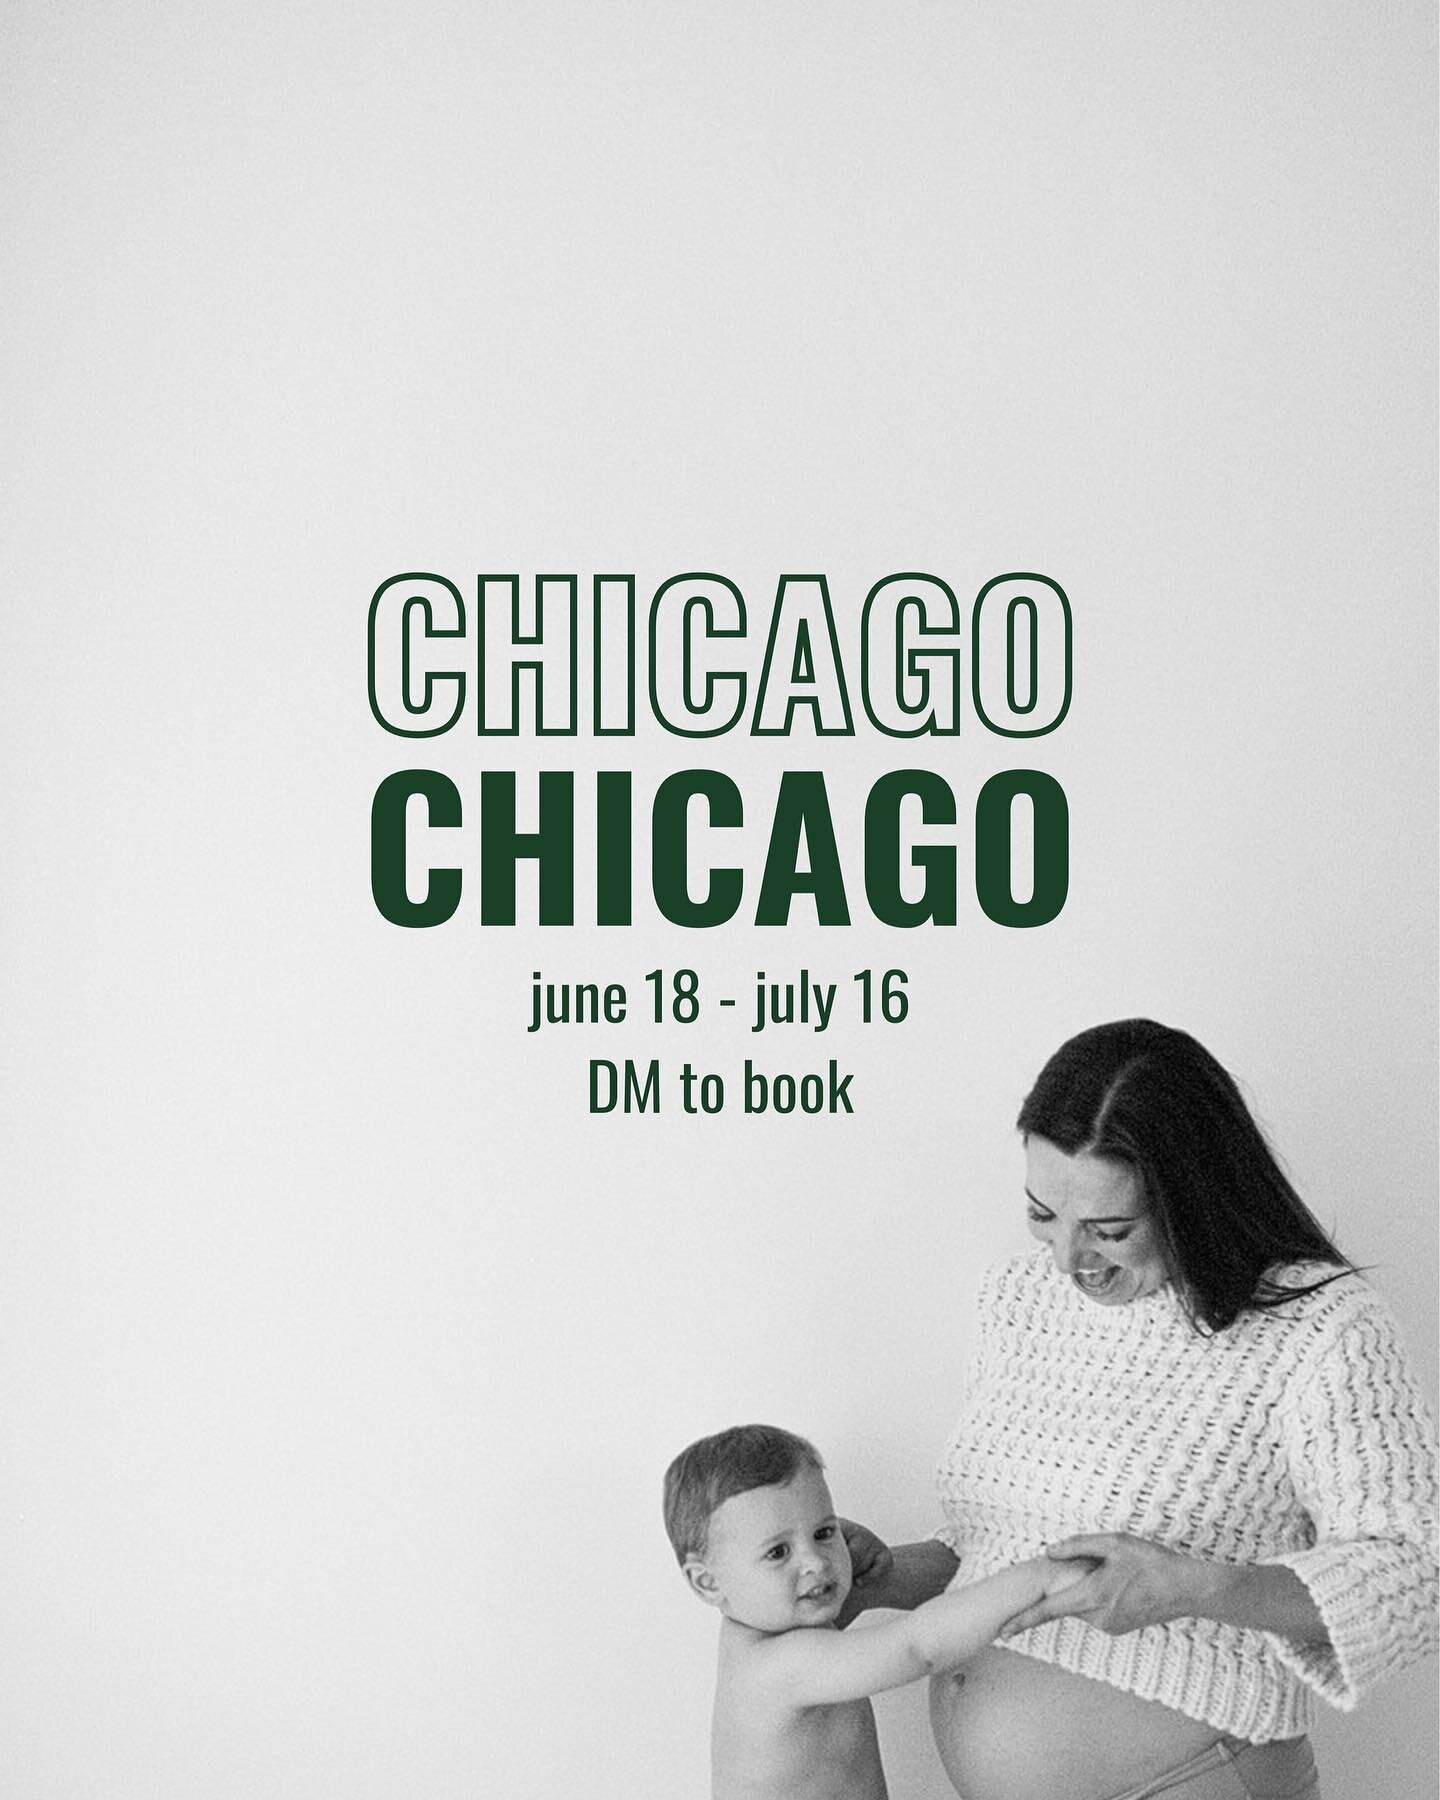 Chicago + Northwest Indiana folks &mdash; I&rsquo;ll be in the area this summer! Current travel dates are June 18 - July 16. Get in touch if you want family photos on film and/or a Super 8 home movie. 

At home, by the lakefront, in the city, your fa